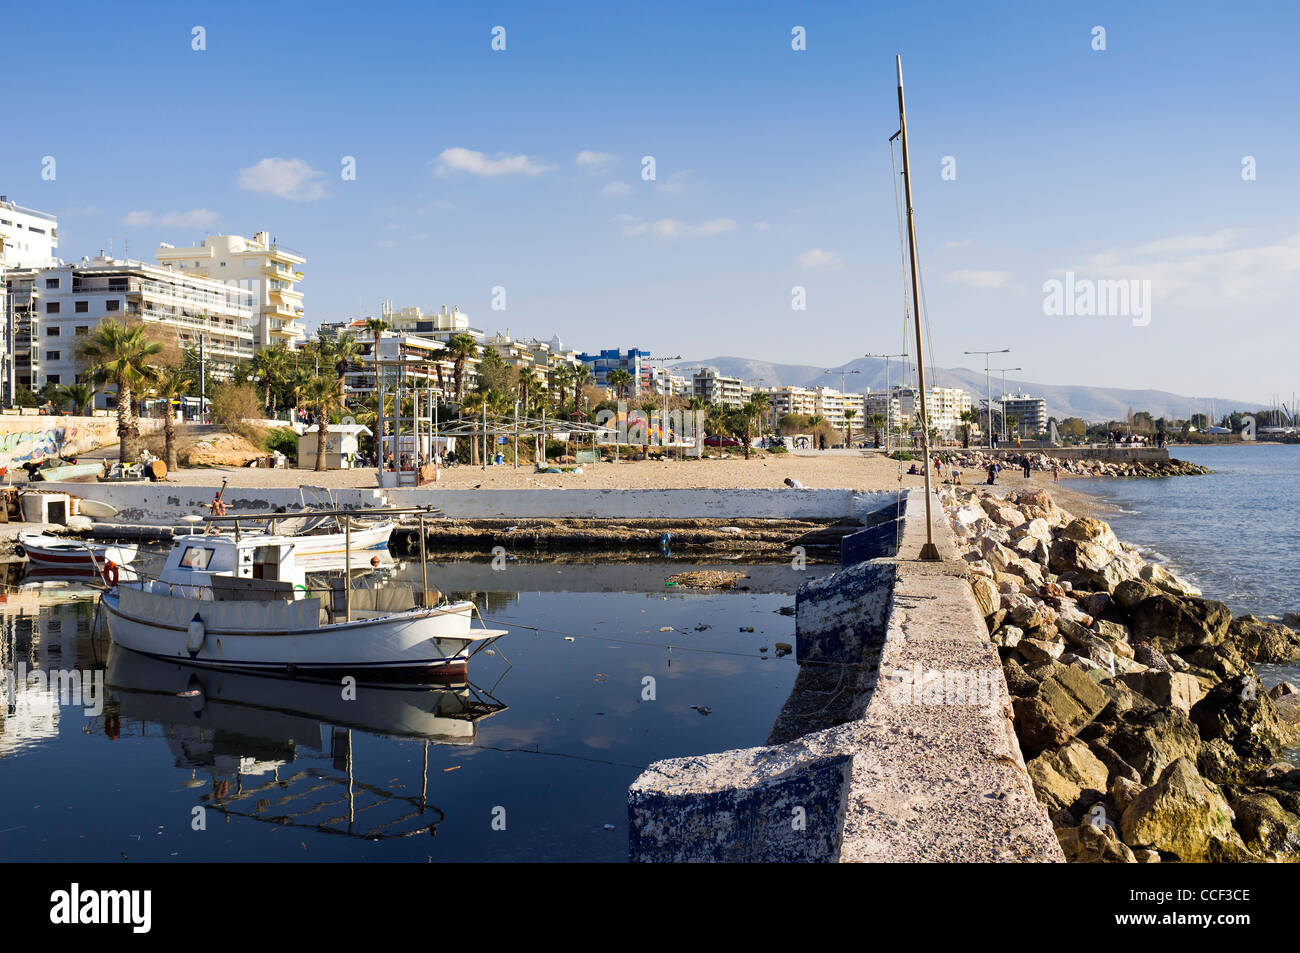 Boats in the harbour, Paleo Faliro, Athens, Greece, Europe Stock Photo